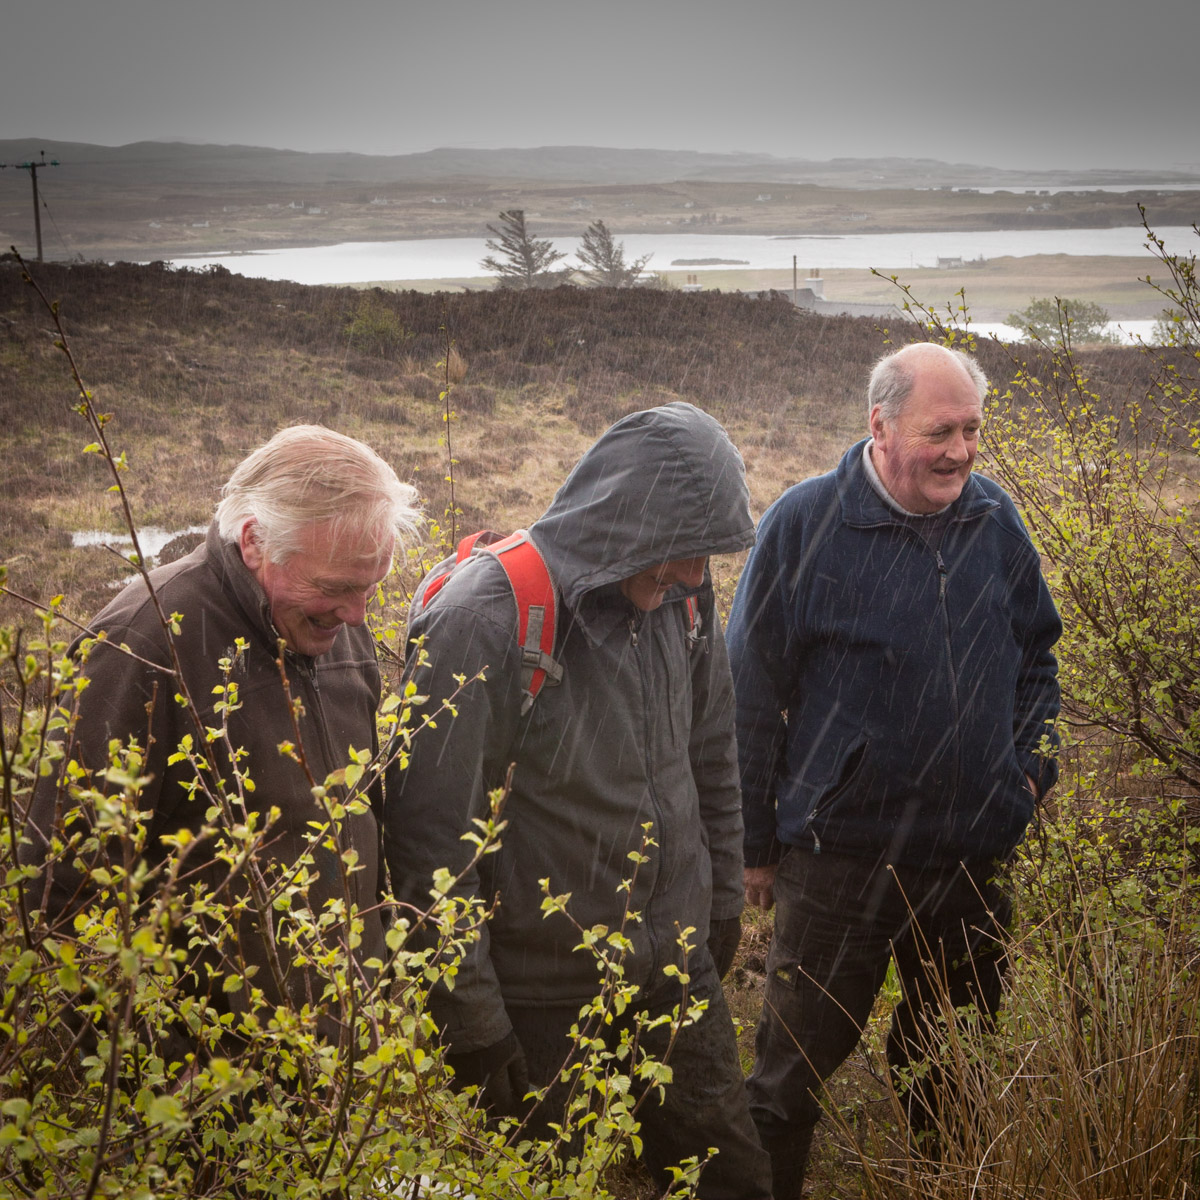 Crofters Peter MacCaskill & Iain Nicolson with Kevin Sutton inspecting their croft woodlands during a wee shower on Roag Common Grazings, Nr Dunvegan, Isle of Skye.  #WeAreHighlandsAndIslands  #TheHillsAreAlwaysHere